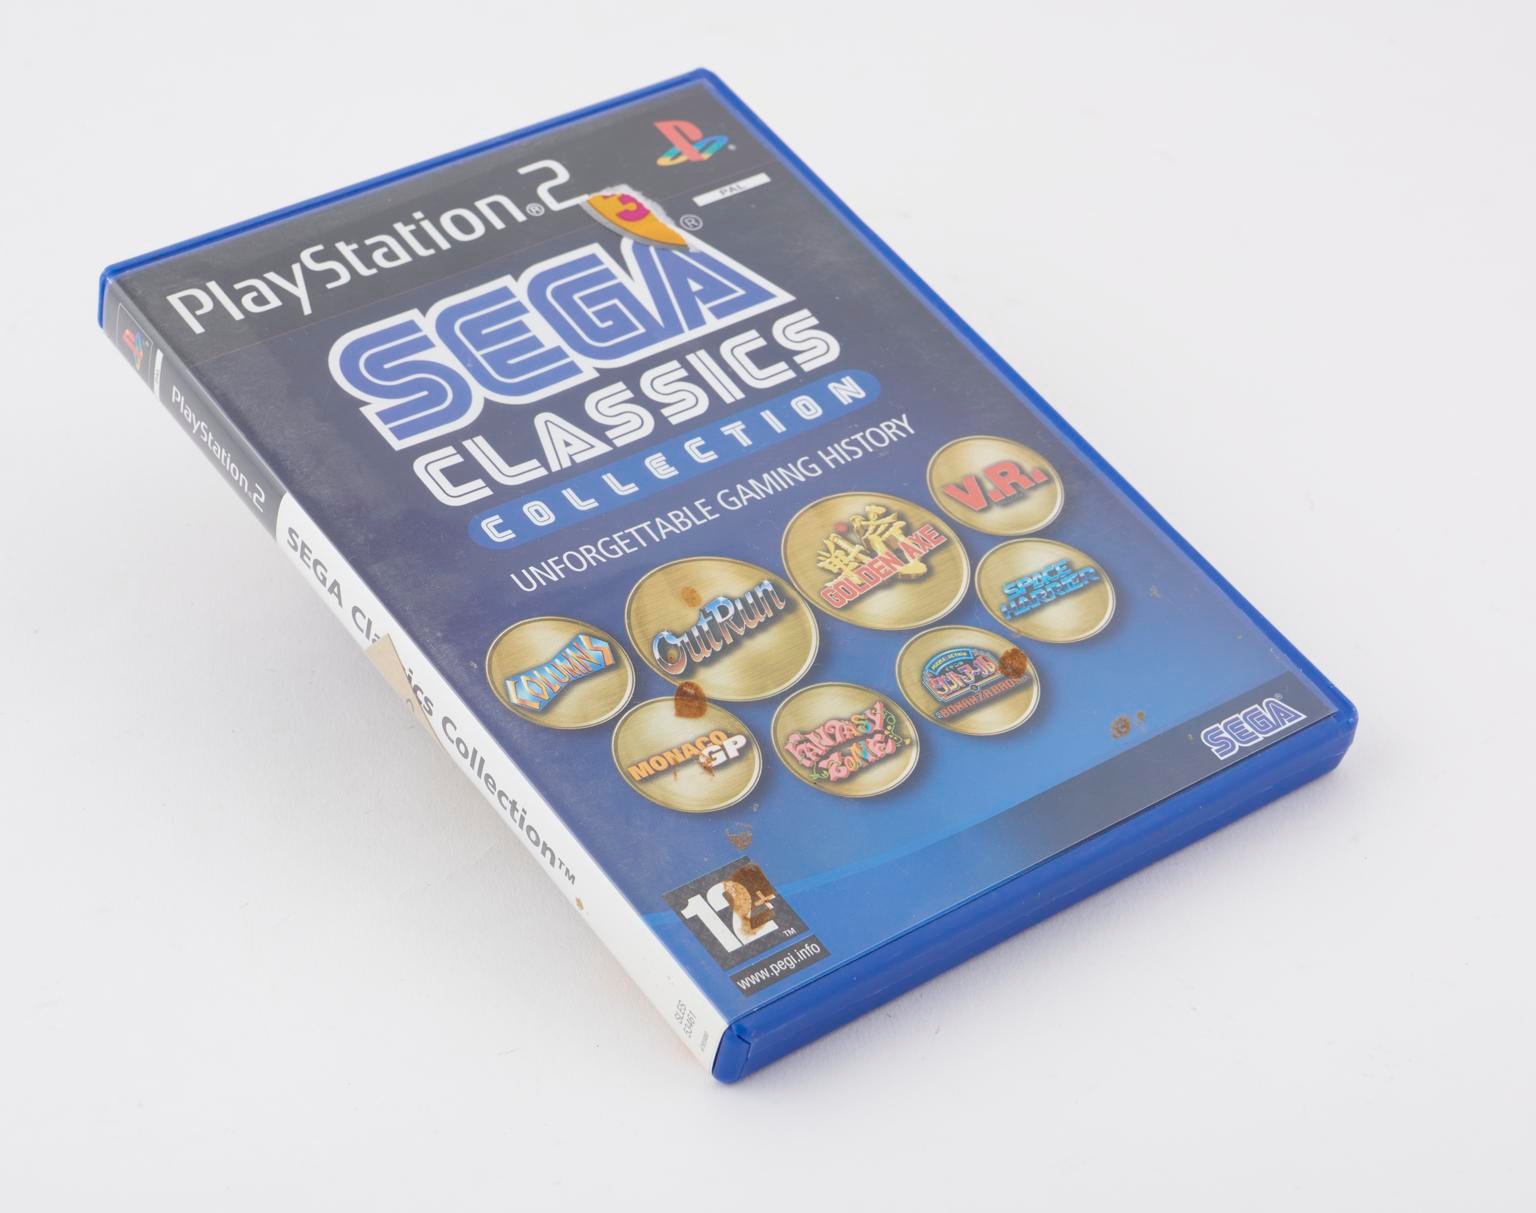 Sega Classics Collection (Sony Playstation Game DVD in Box)